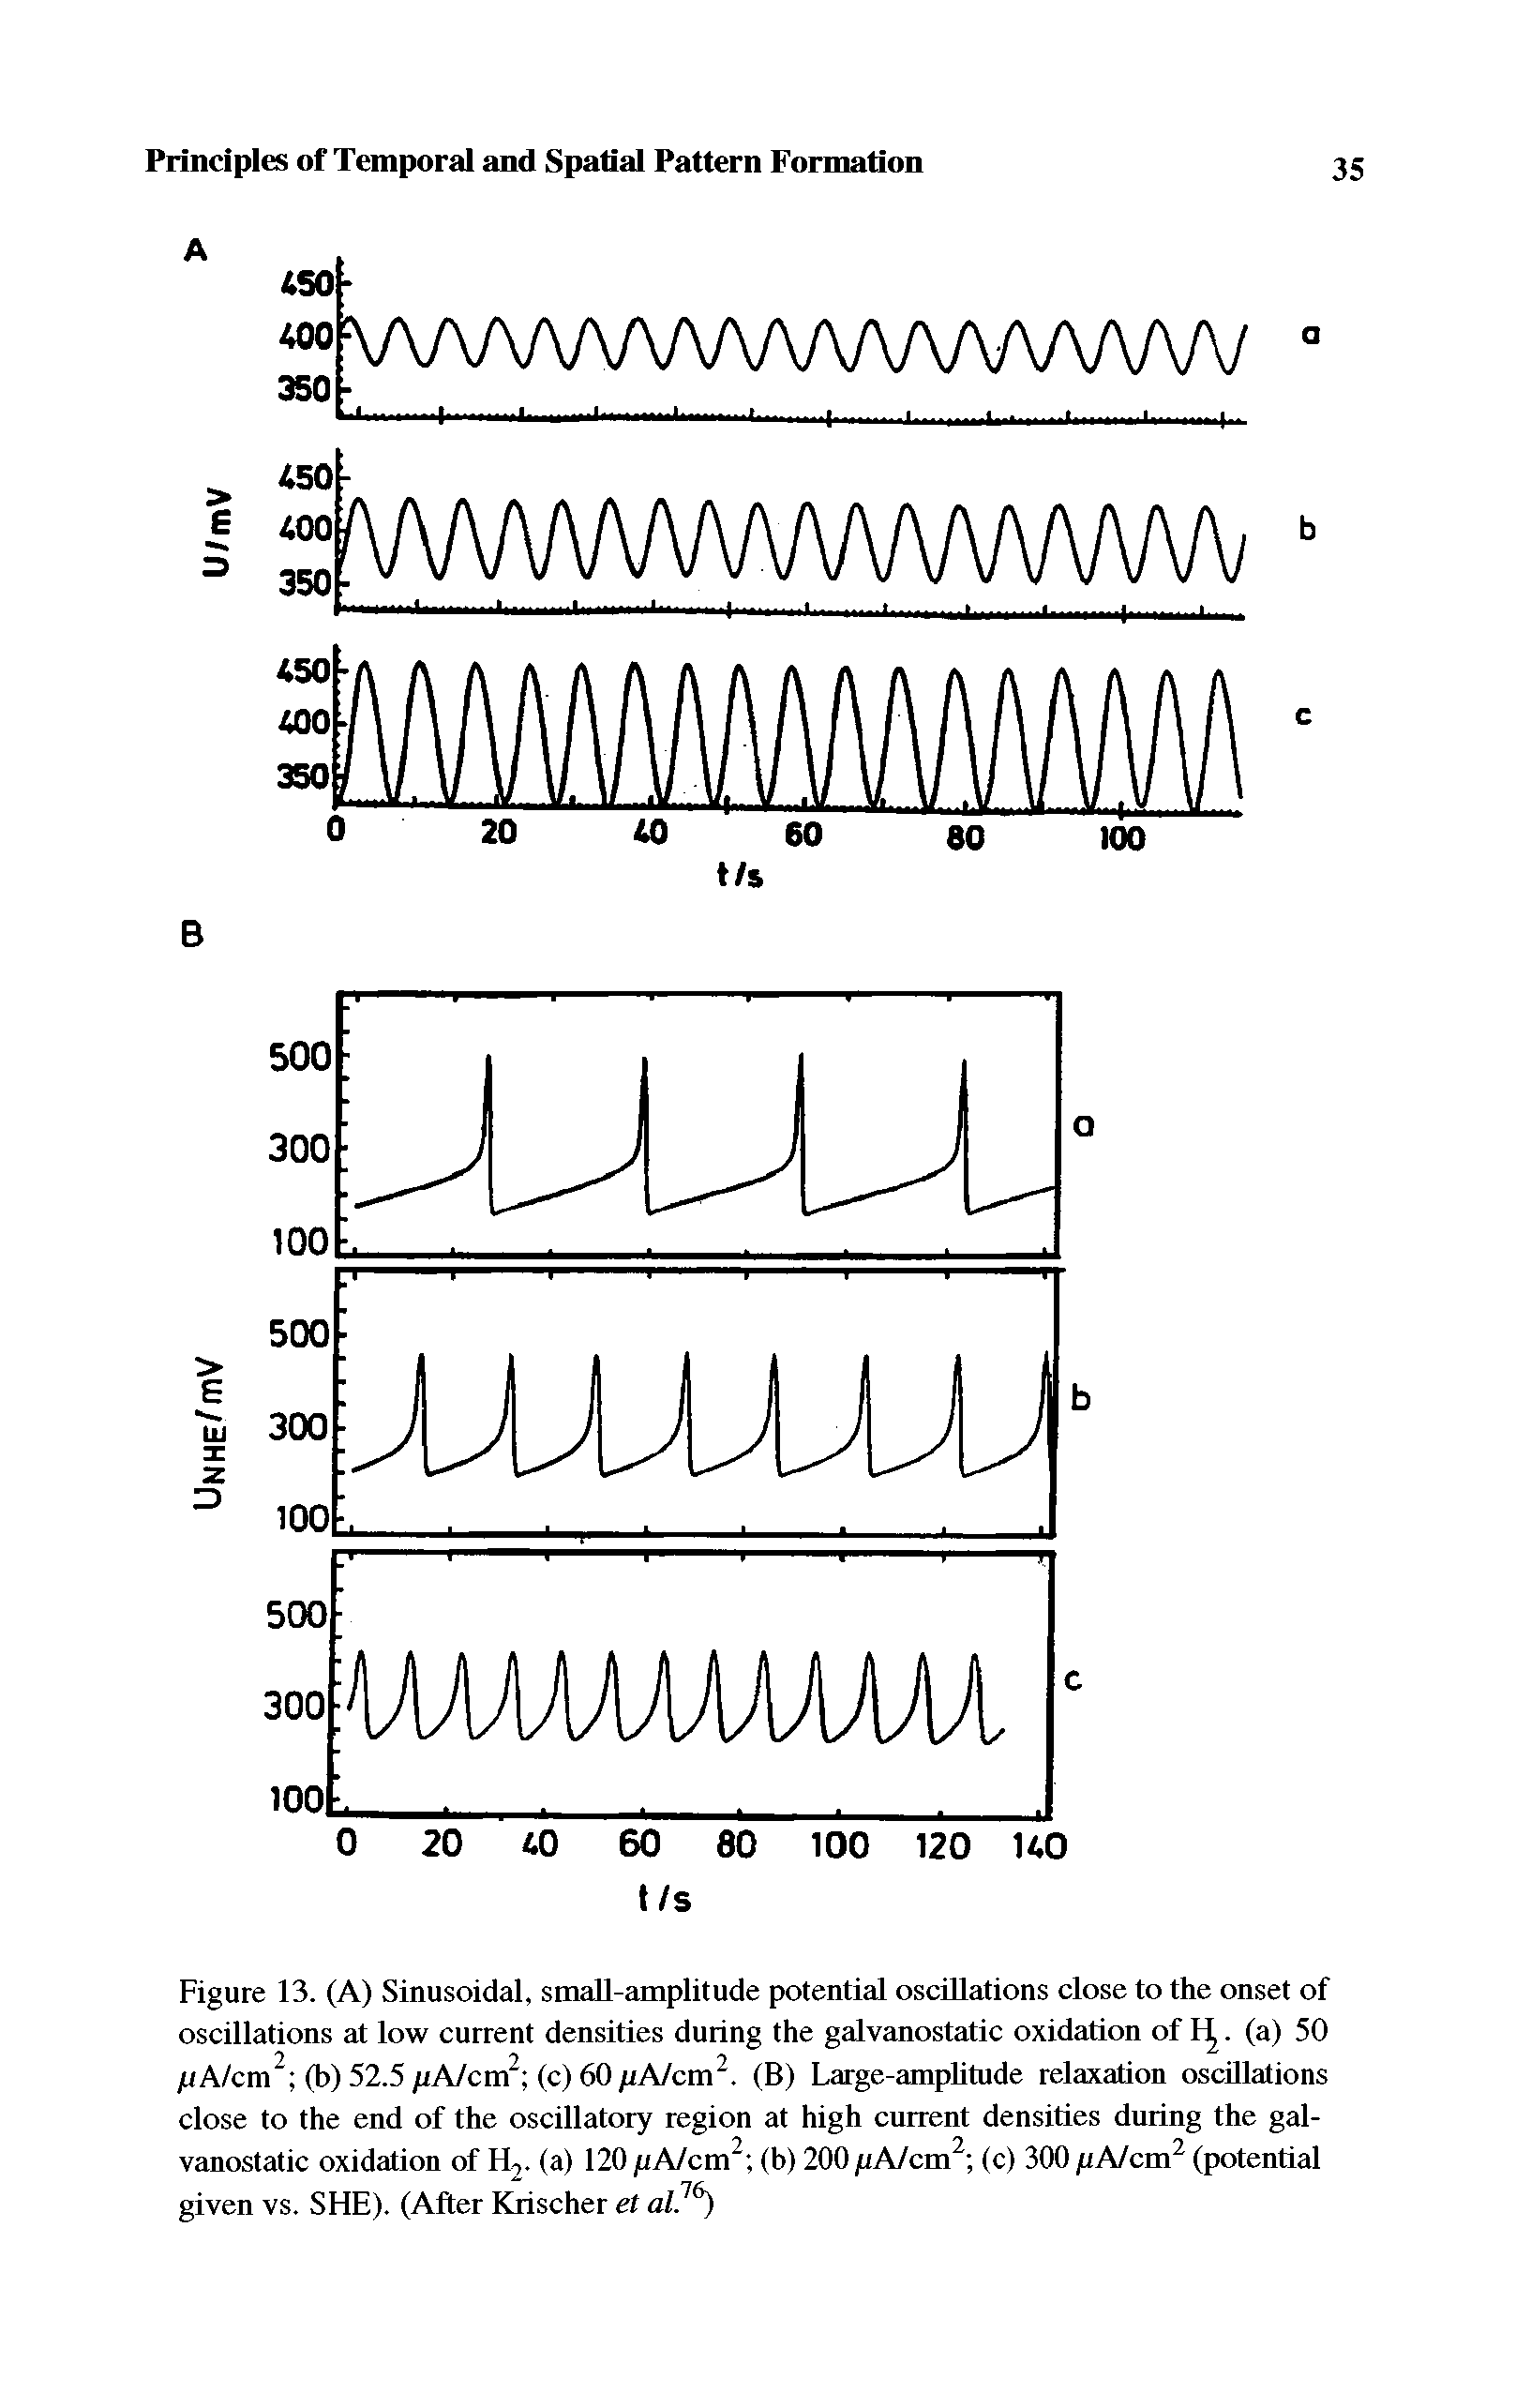 Figure 13. (A) Sinusoidal, smaU-amplitude potential oscillations close to the onset of oscillations at low current densities during the galvanostatic oxidation of. (a) 50 //A/cm (b) 52.5 //A/cm (c) 60 //A/cm. (B) Large-amphtude relaxation oscillations close to the end of the oscillatory region at high current densities during the galvanostatic oxidation of H,. (a) 120 pA/cm (b) 200 pA/cm (c) 300 pA/cm (potential given vs. SHE). (After Krischer et...